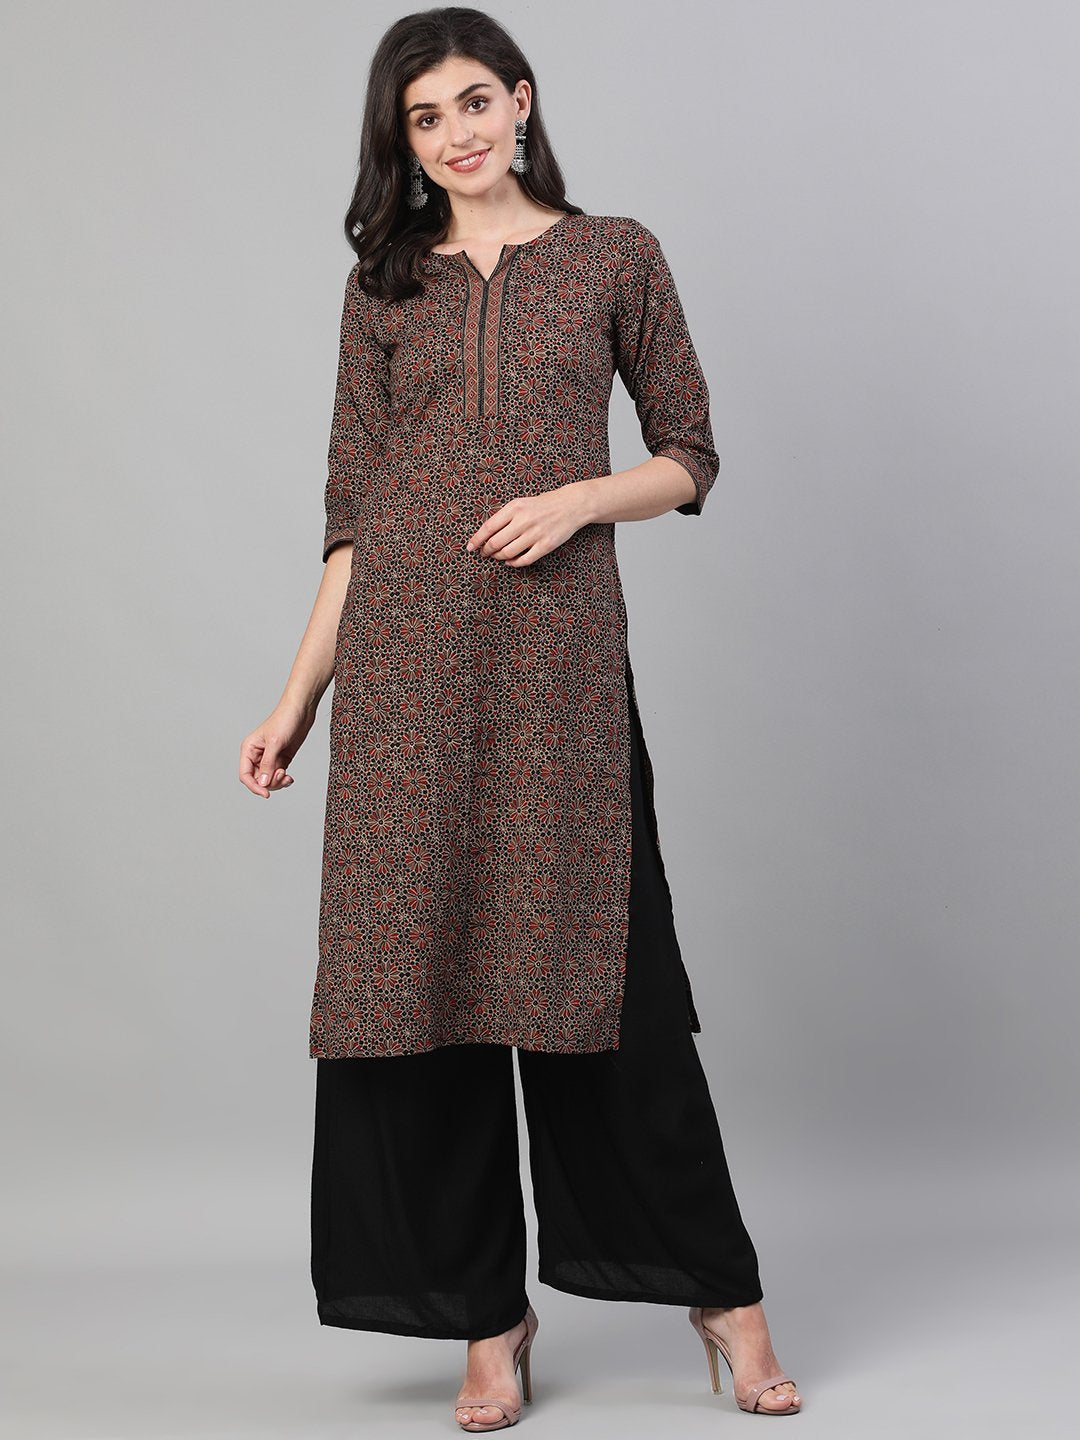 Women's Brown Calf Length Three-Quarter Sleeves Straight Ethnic Motif Printed Cotton Kurta With Pockets And Face Mask - Nayo Clothing